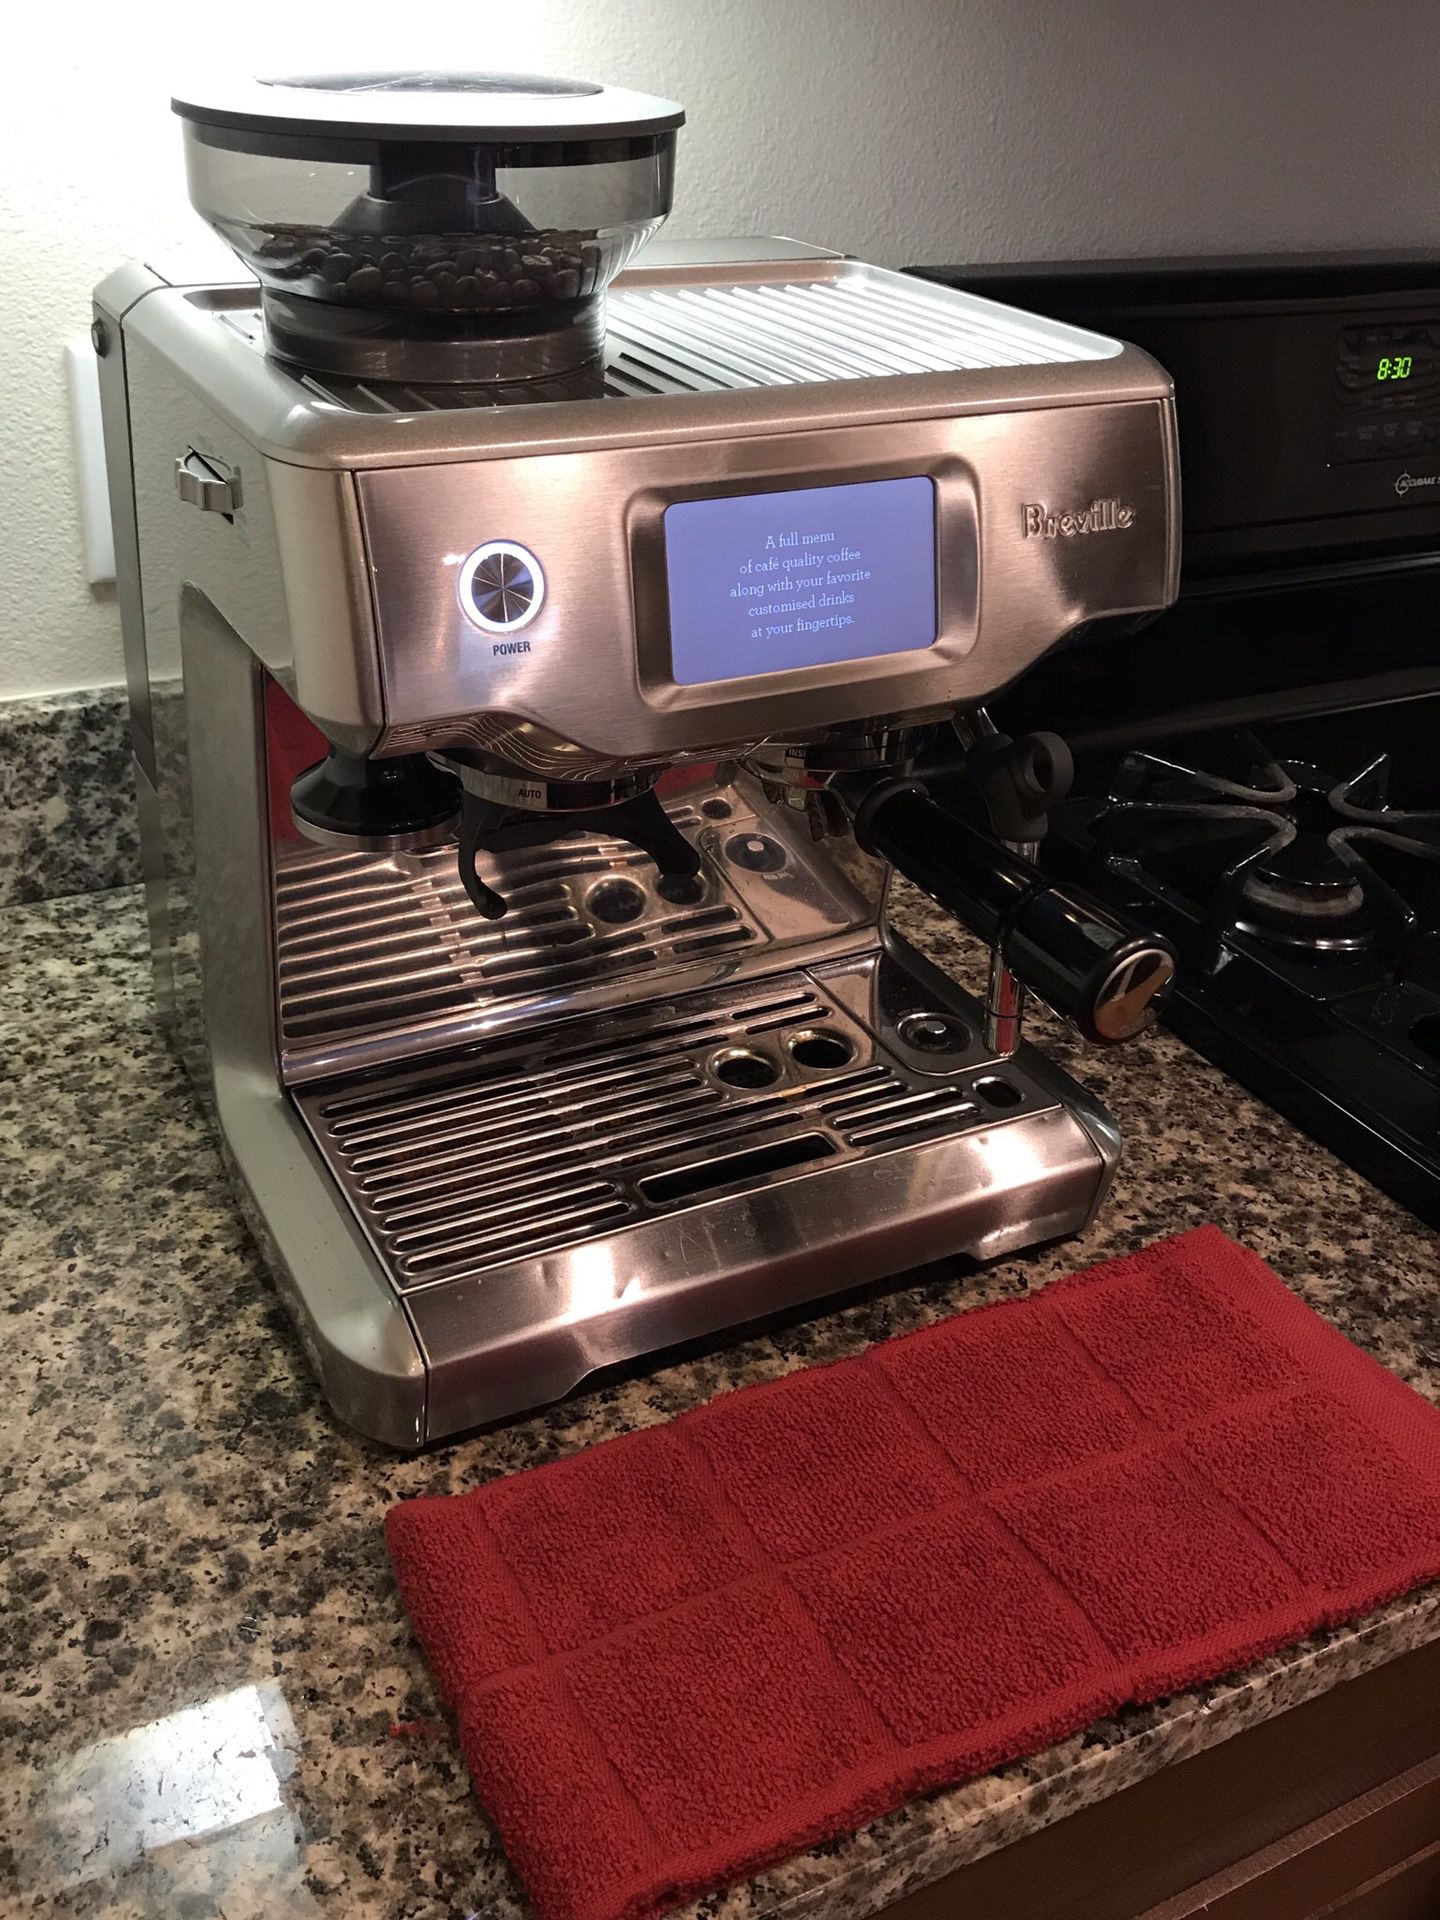 Breville Joule Oven Air Fryer Pro for Sale in Torrance, CA - OfferUp